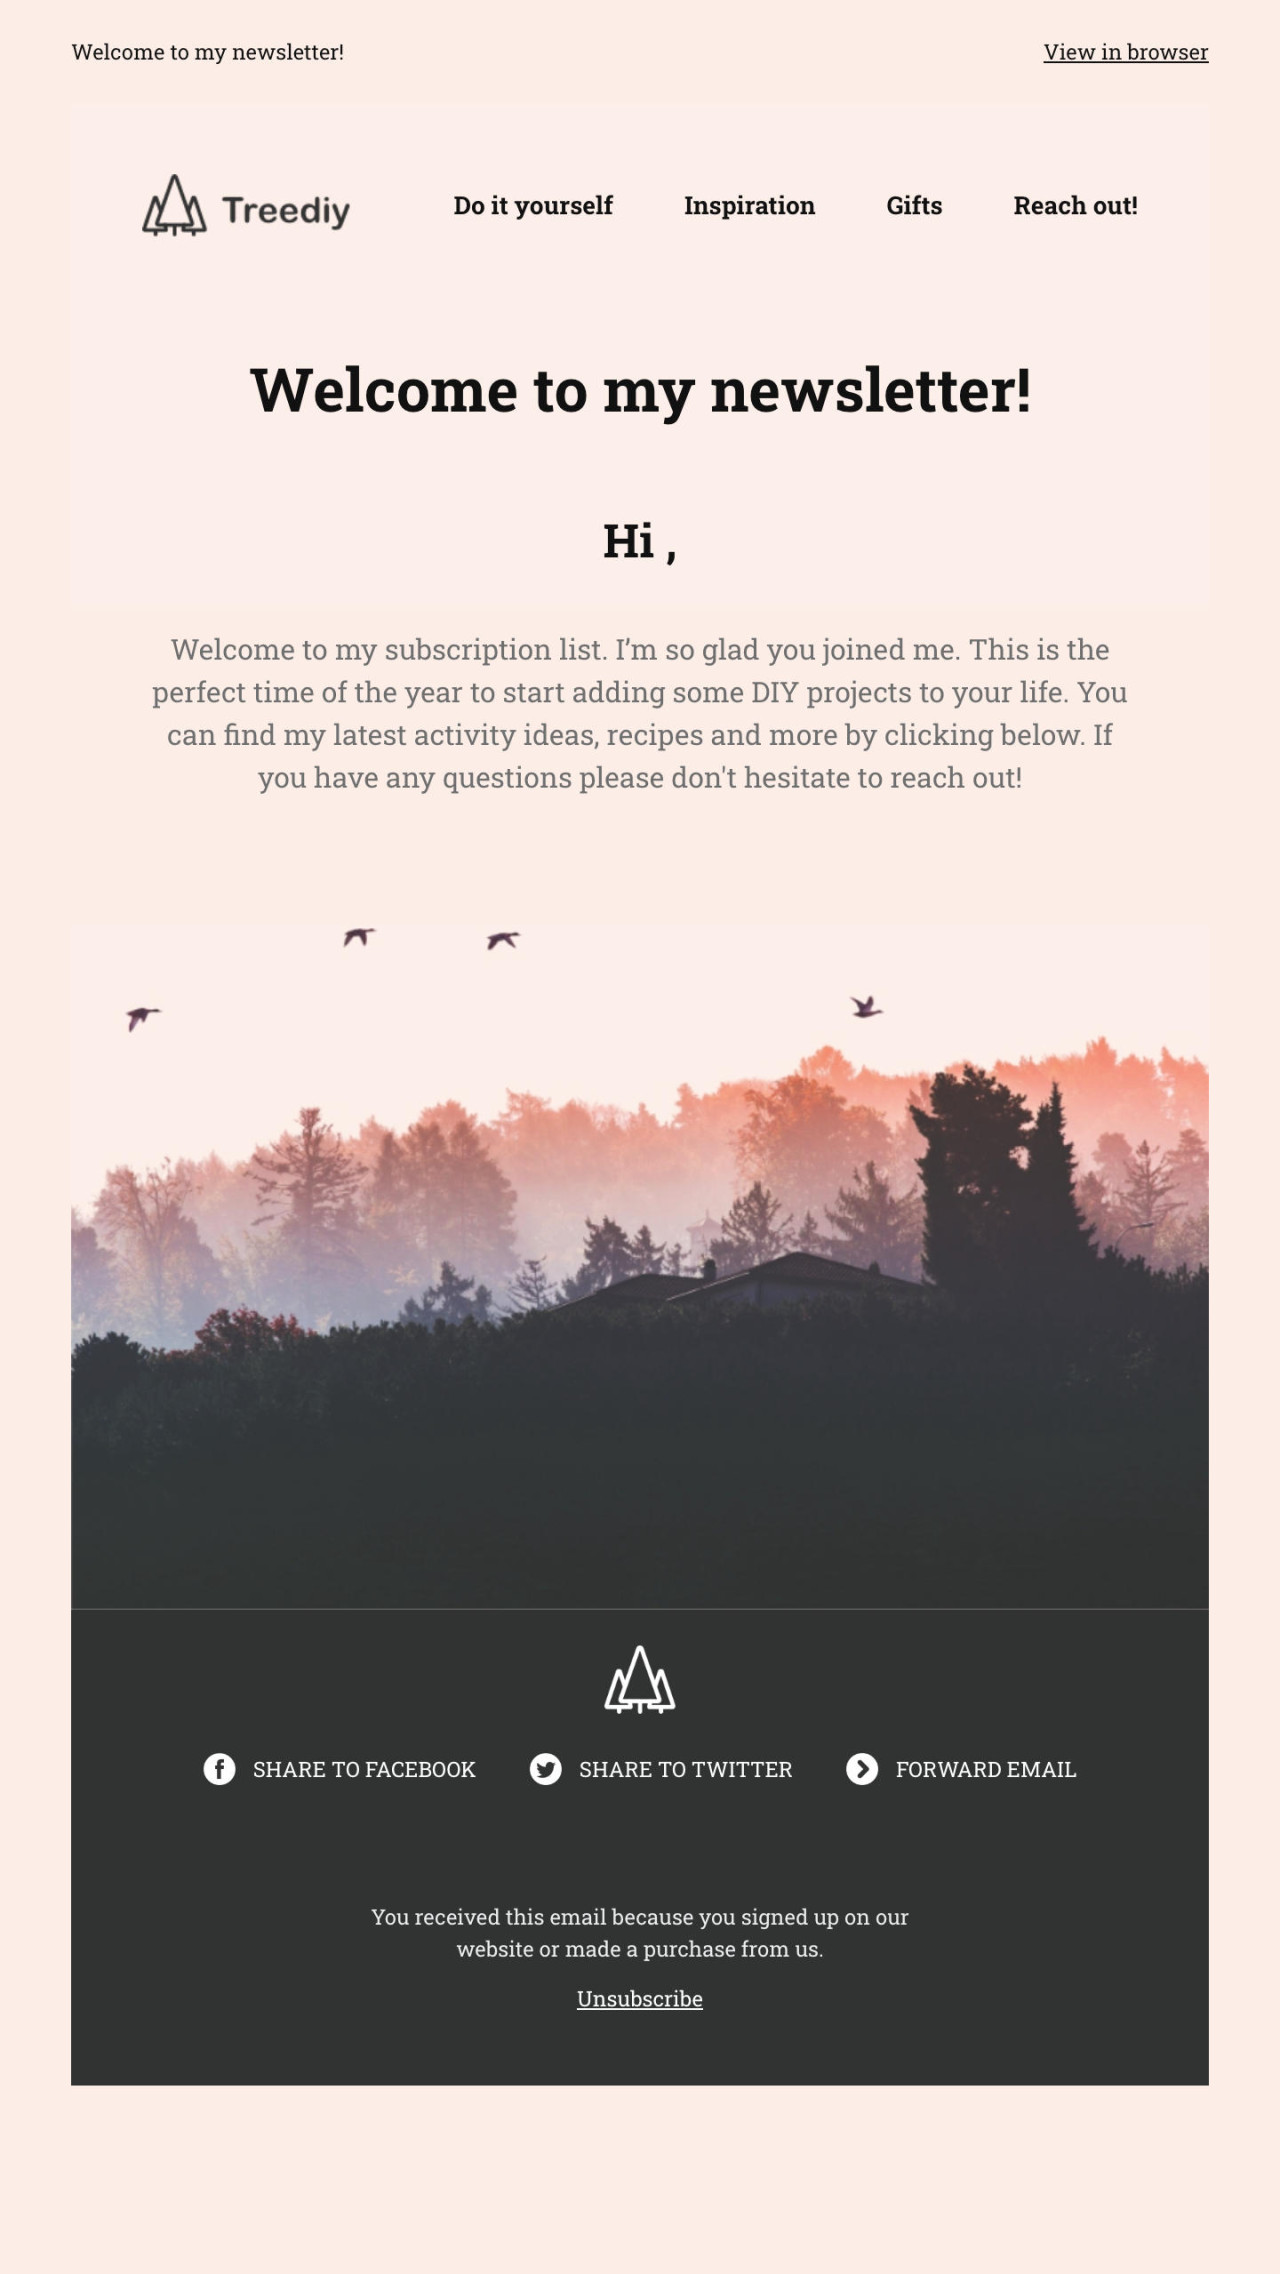 Autumn welcome email template - Made by MailerLite